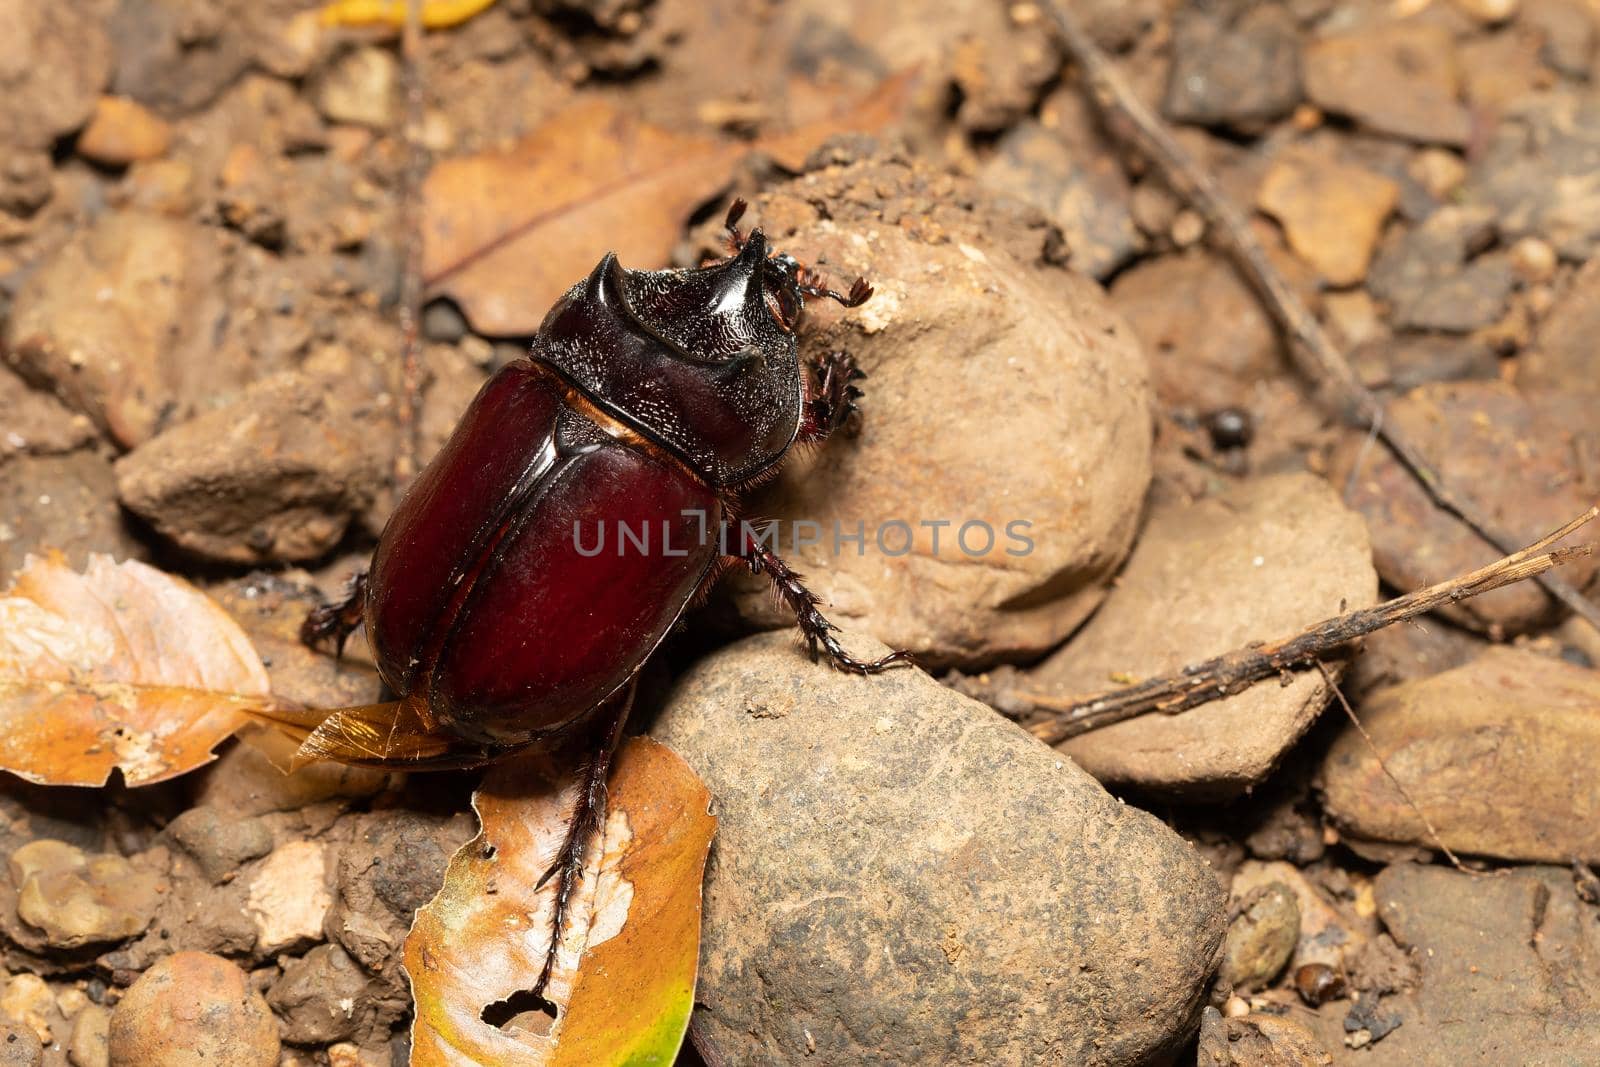 Strategus aloeus, the ox beetle, is a species of rhinoceros beetle, big bug founded in Carara National Park - Tarcoles, Wildlife in Costa Rica.